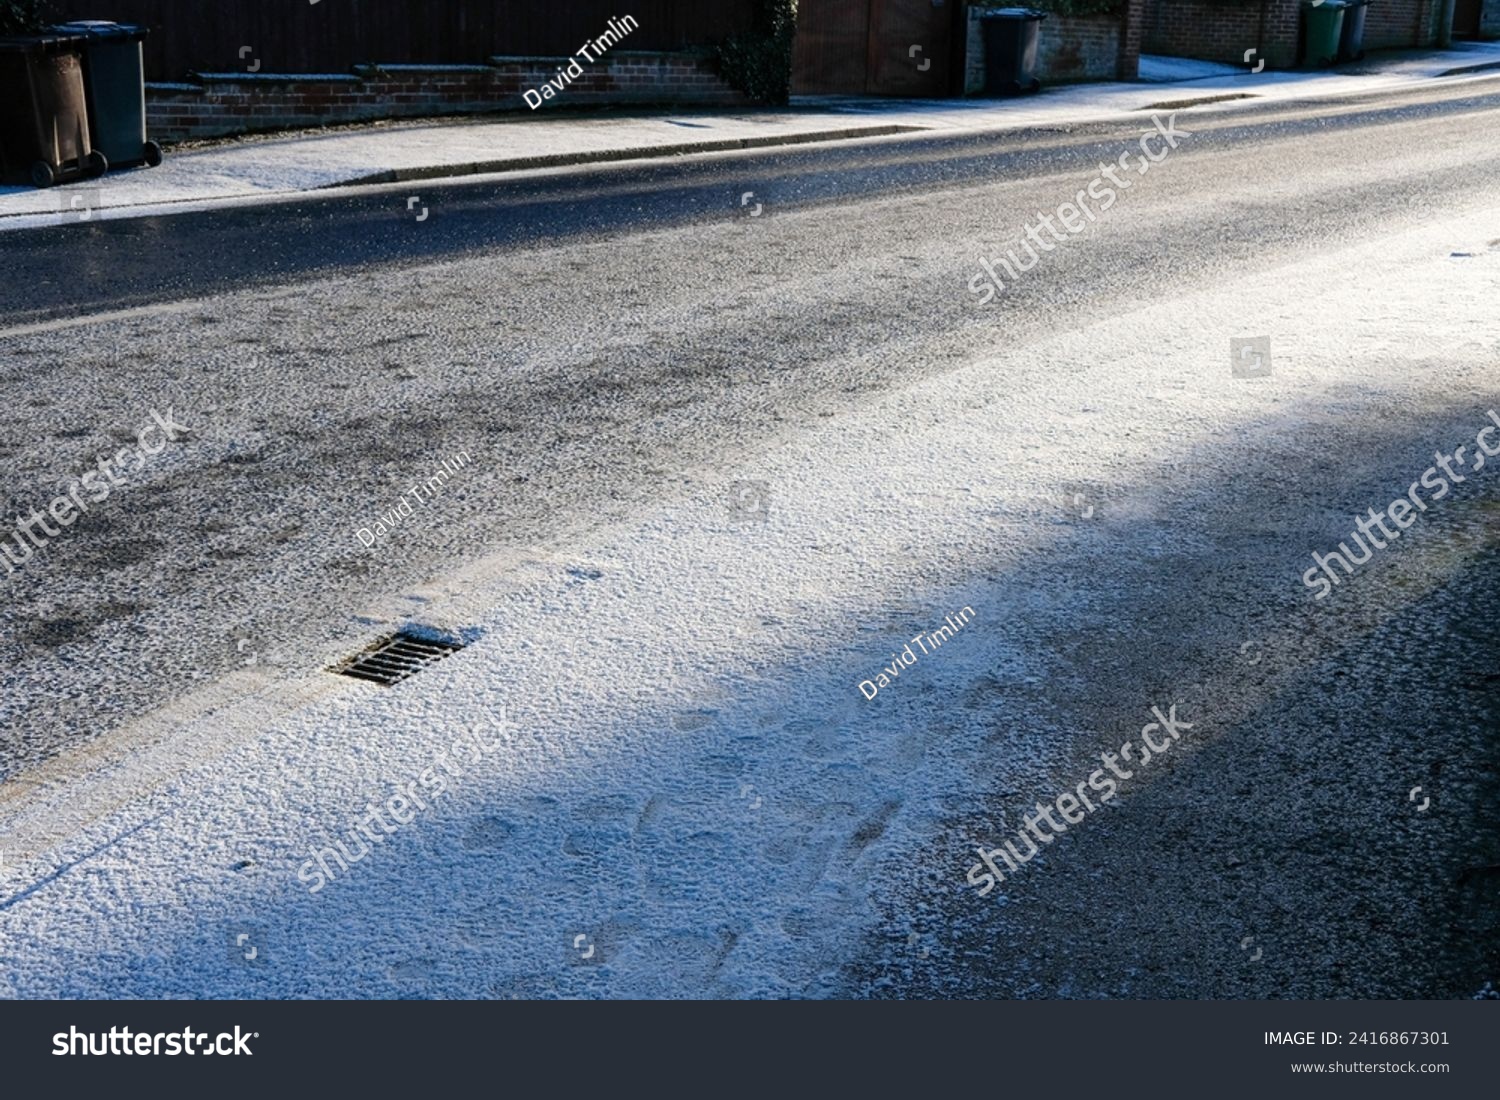 Snow settling on a road during winter cold snap  #2416867301